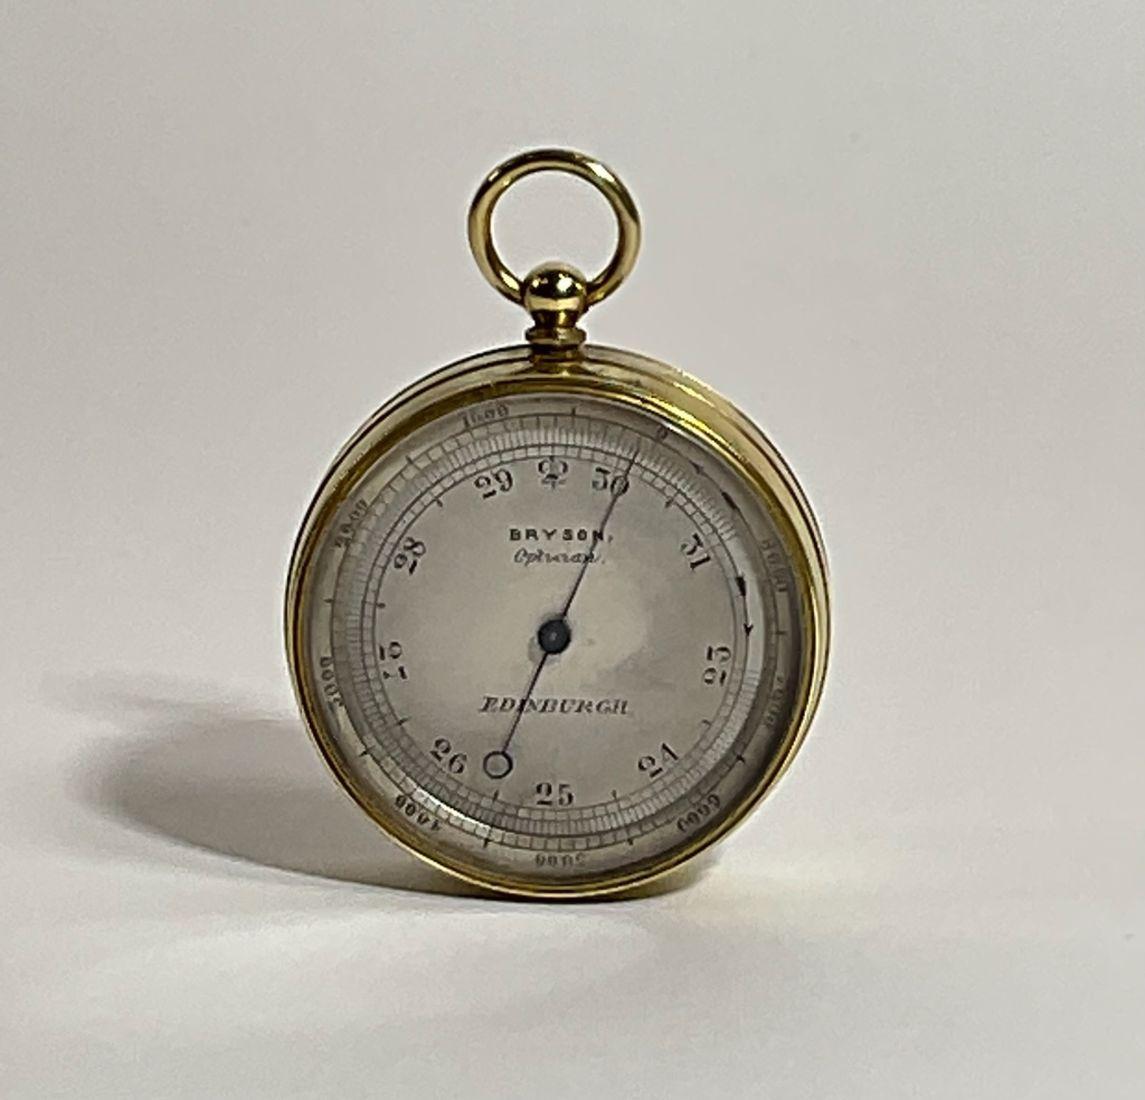 Brass cased nineteenth century barometer by Bryson of Edinburgh. With adjustment keyhole on back of case. Heavy and sturdy instrument.

Dimensions; 1 3/4